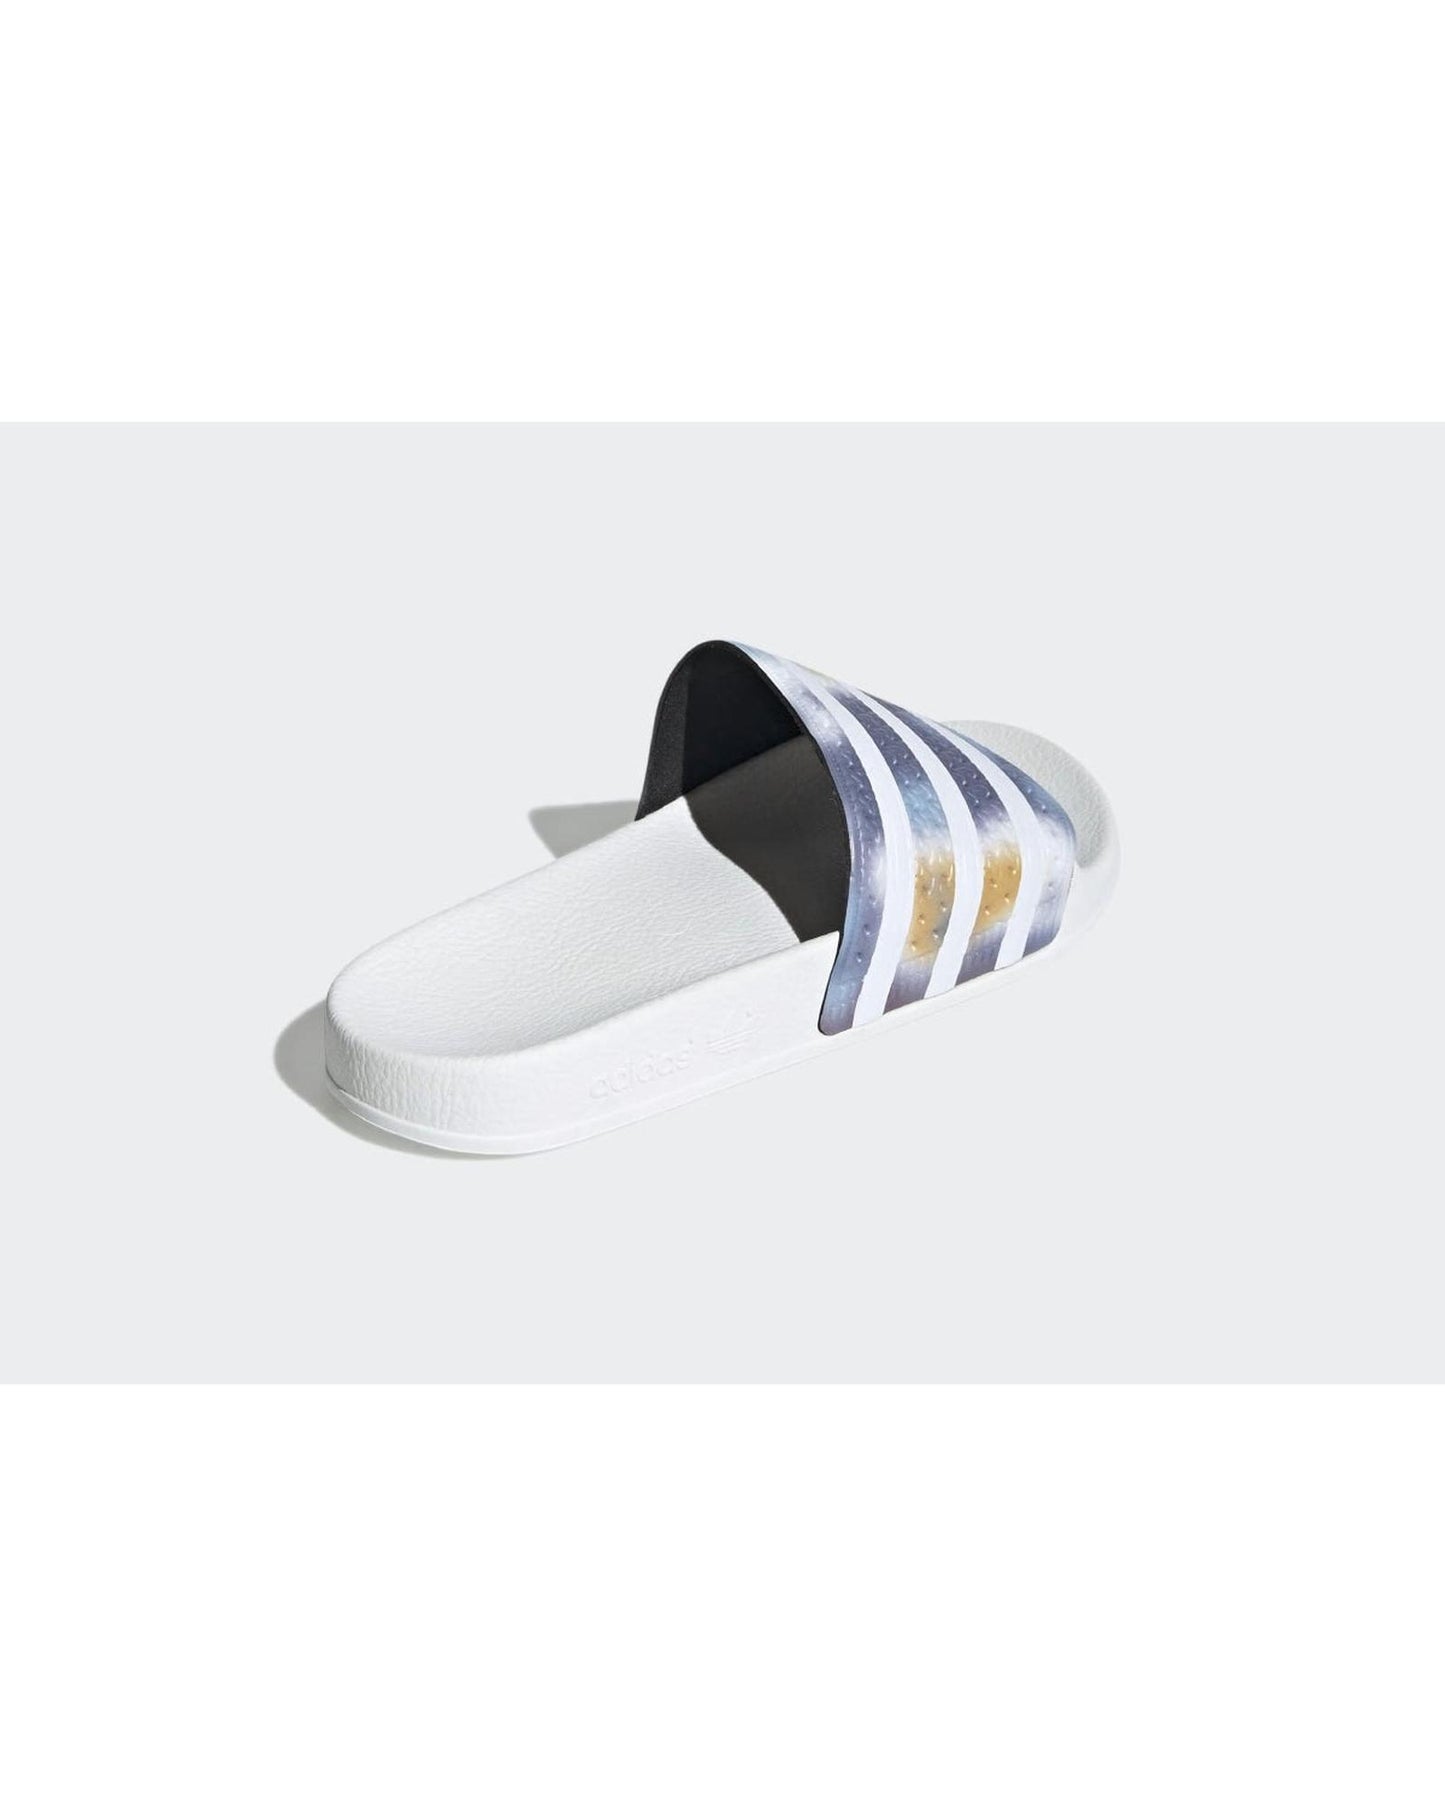 Slip-on Slides with Textile Lining - 7 US